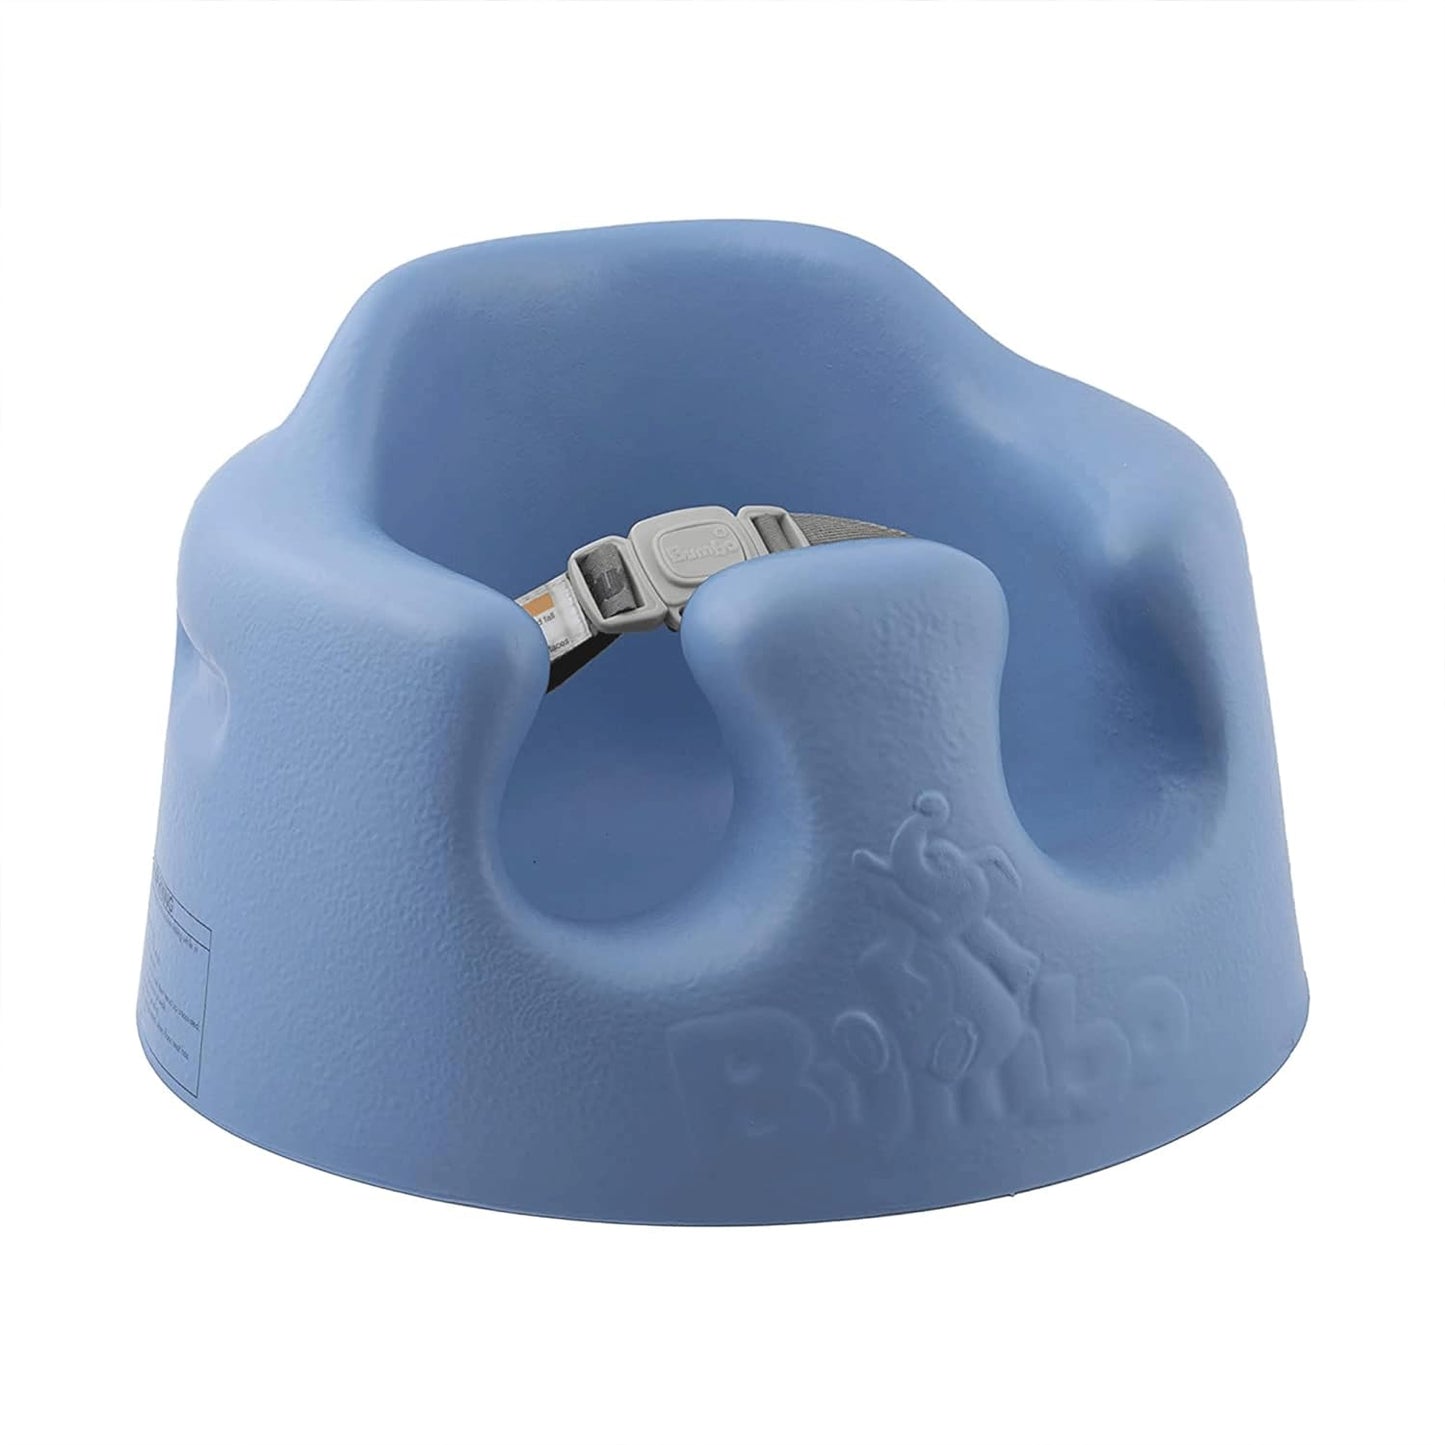 New Bumbo Infant Floor Seat Booster Seat (Blue)